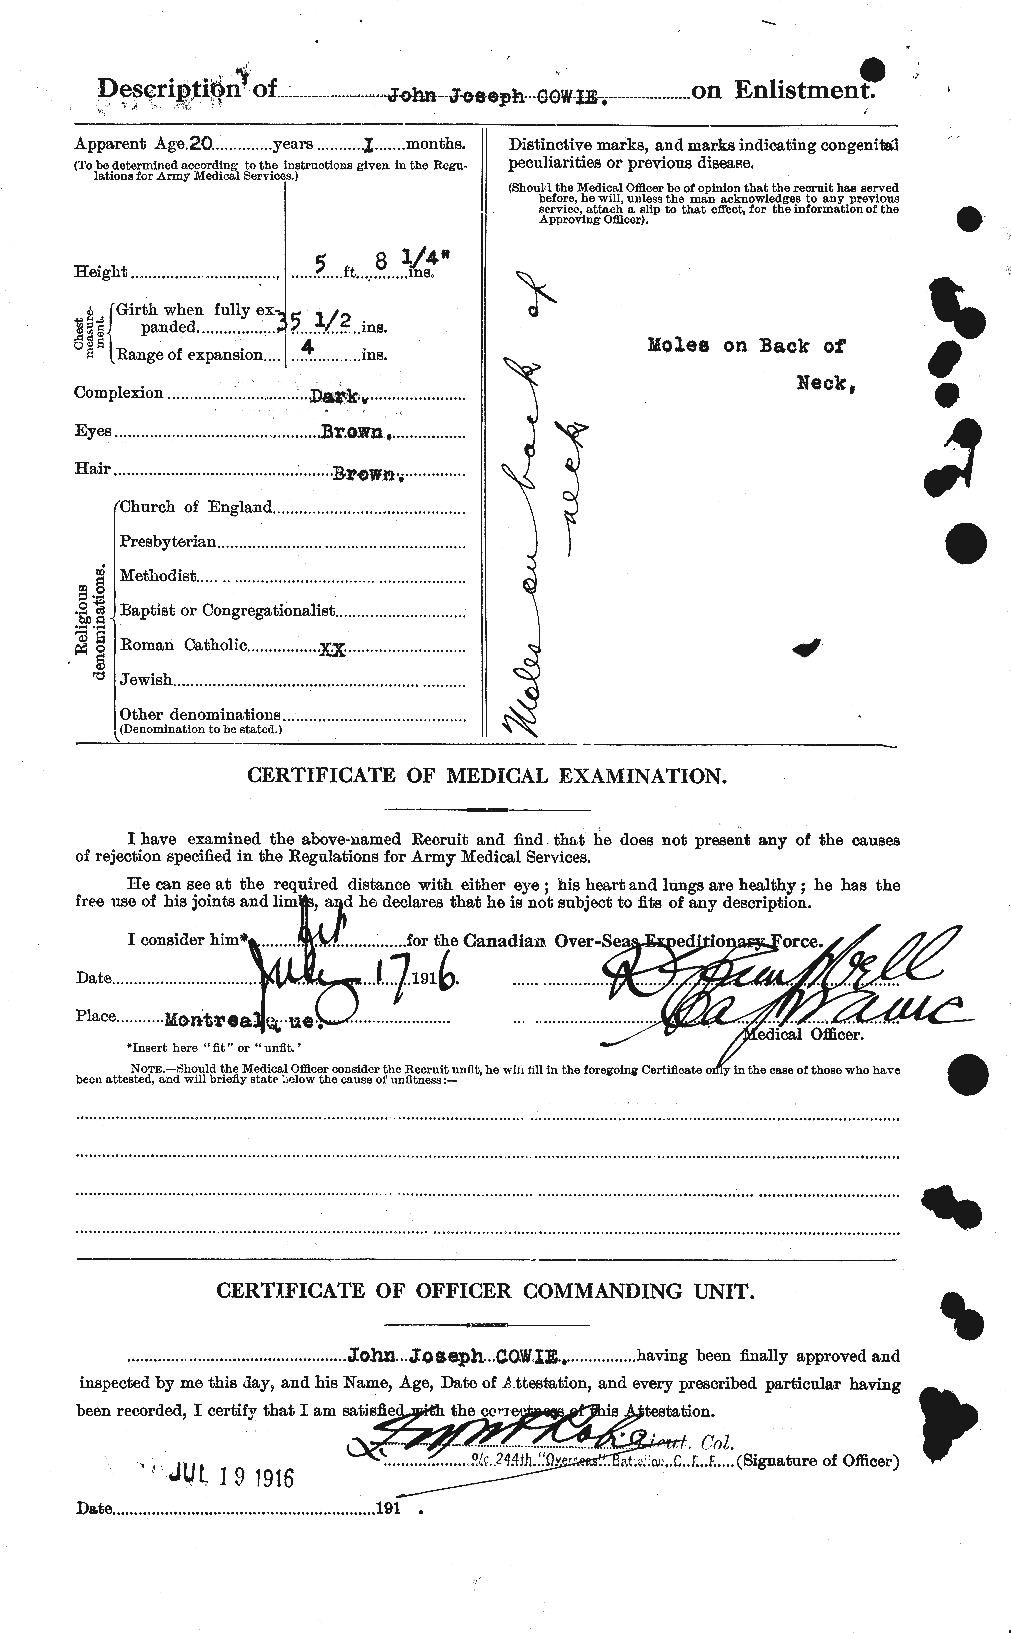 Personnel Records of the First World War - CEF 060000b